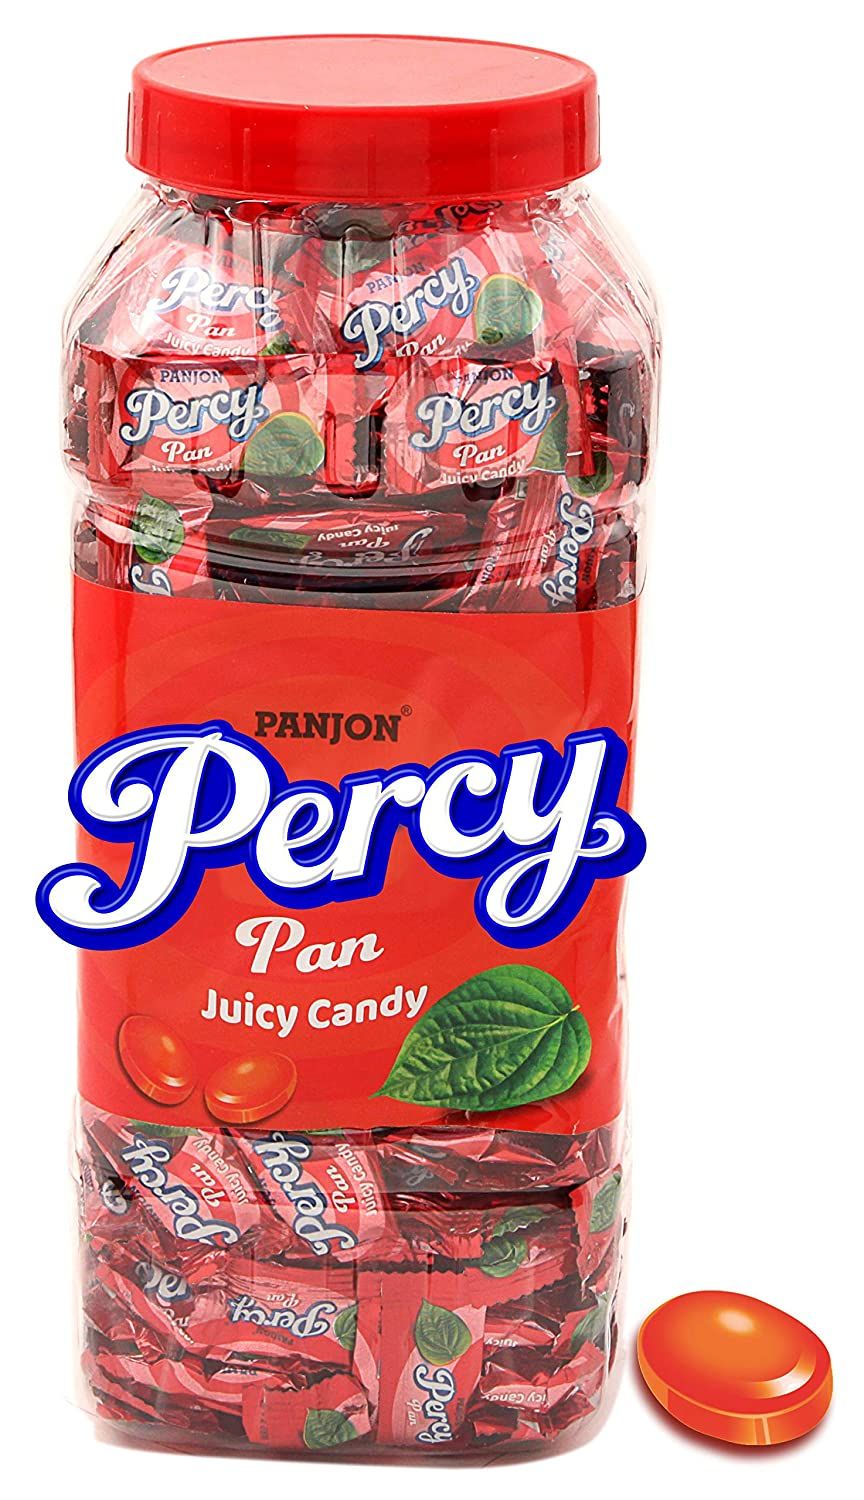 Percy Pan Candy Toffee Candies Image